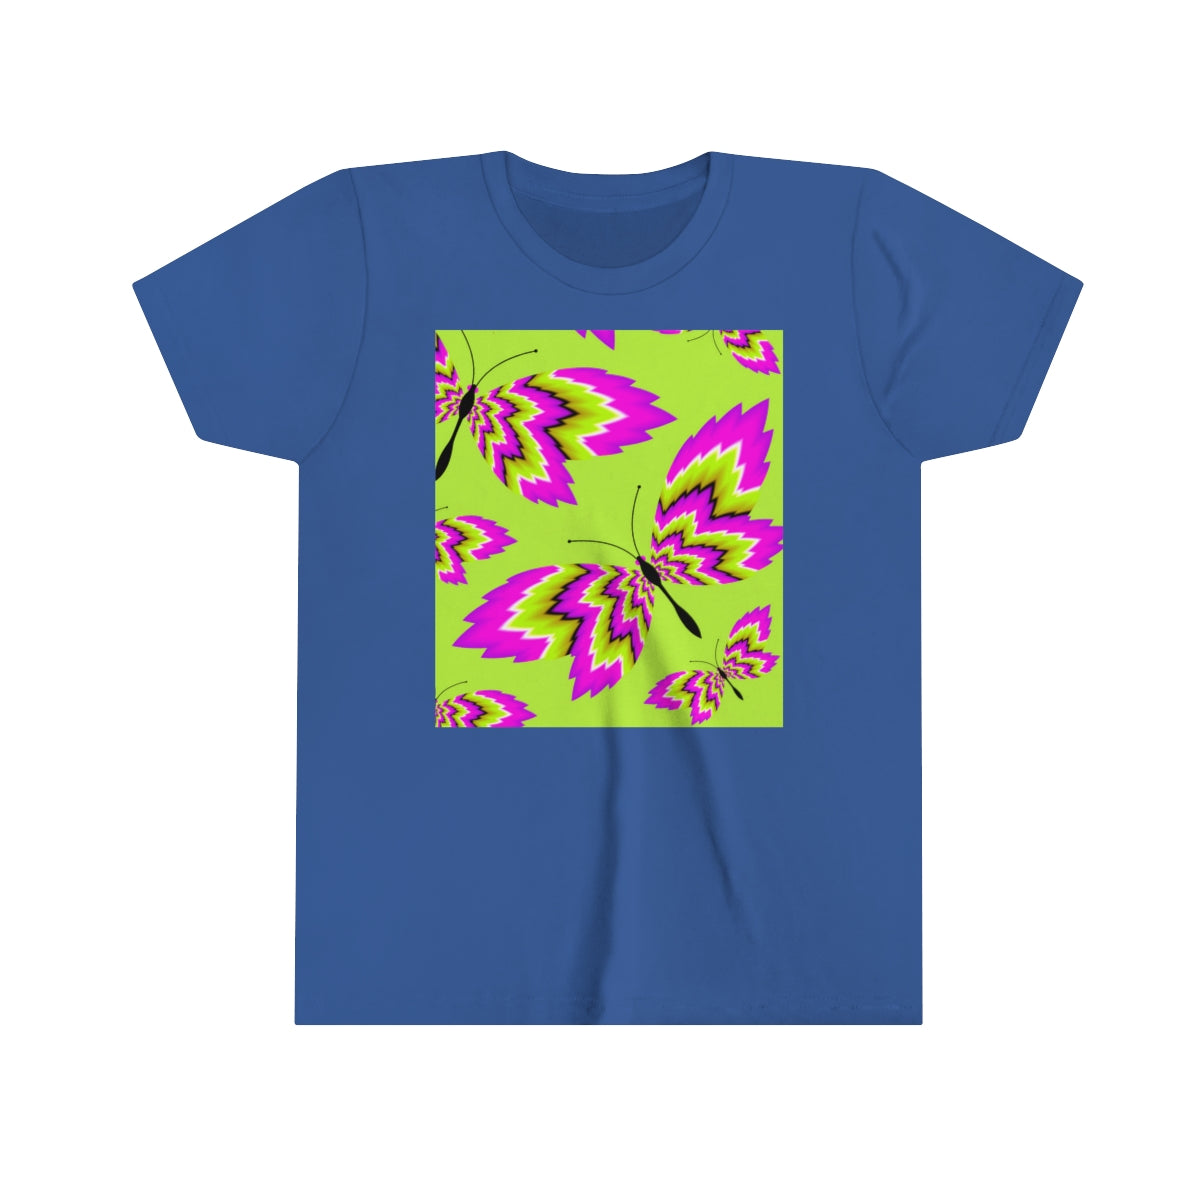 Youth Short Sleeve Tee "Optical illusion Dance of butterflies"